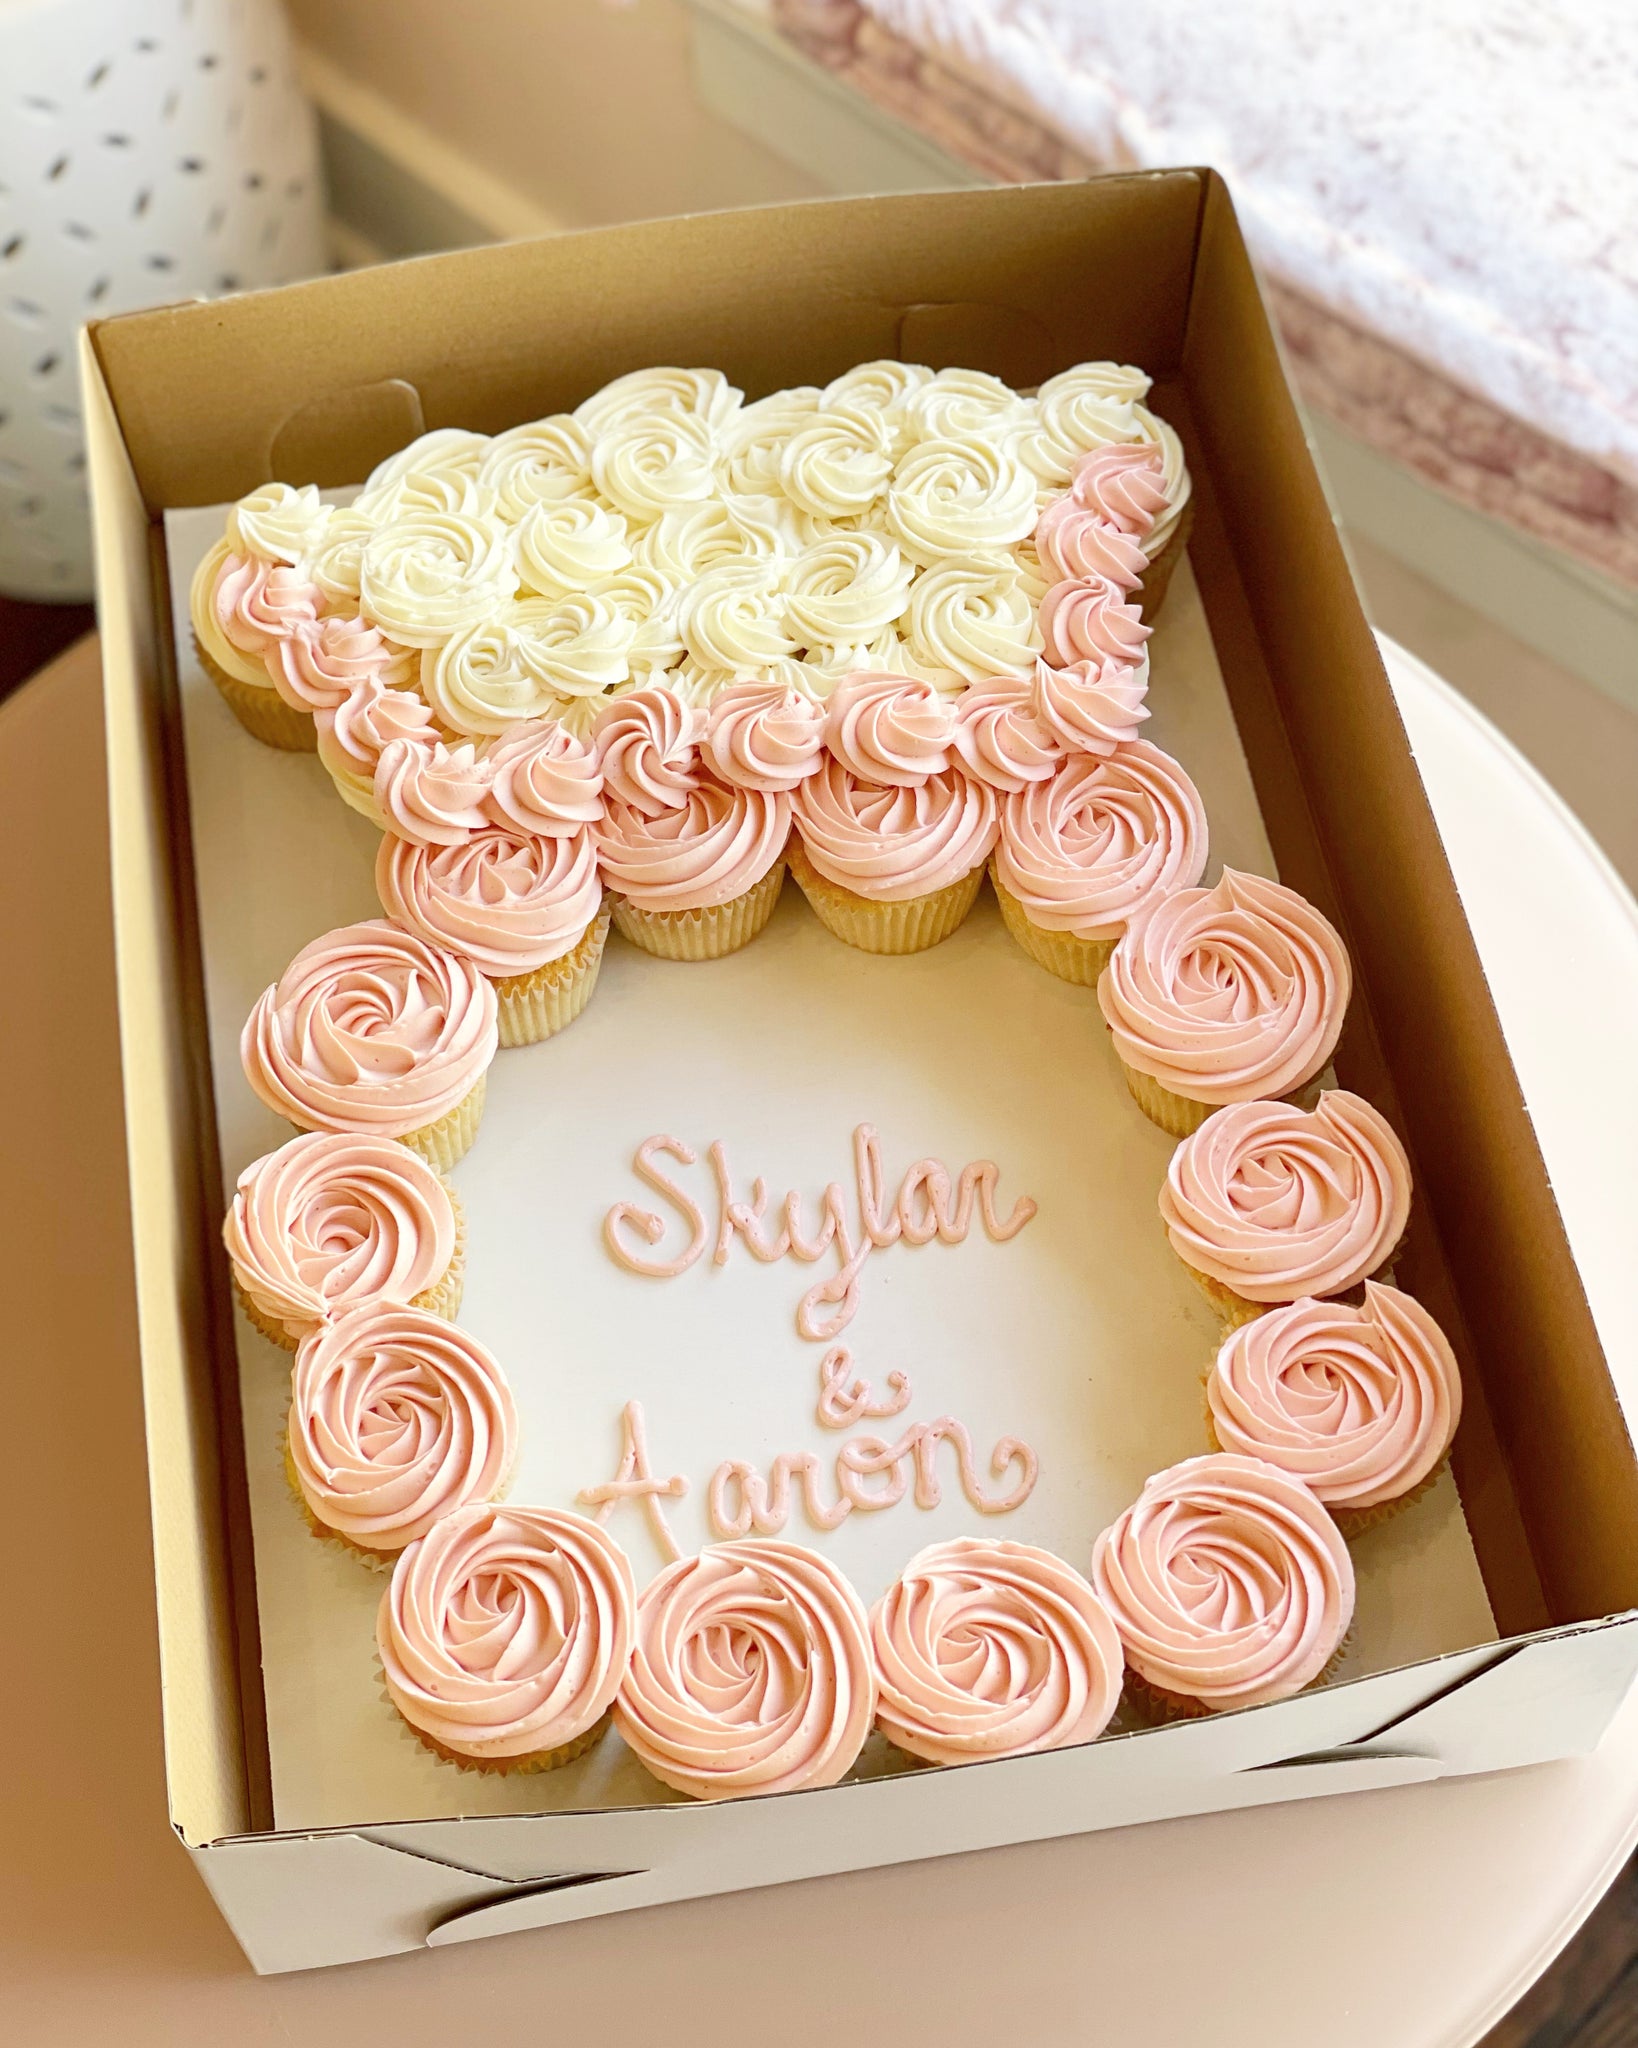 Ombre Letter Cupcake Cake | MelCakes25